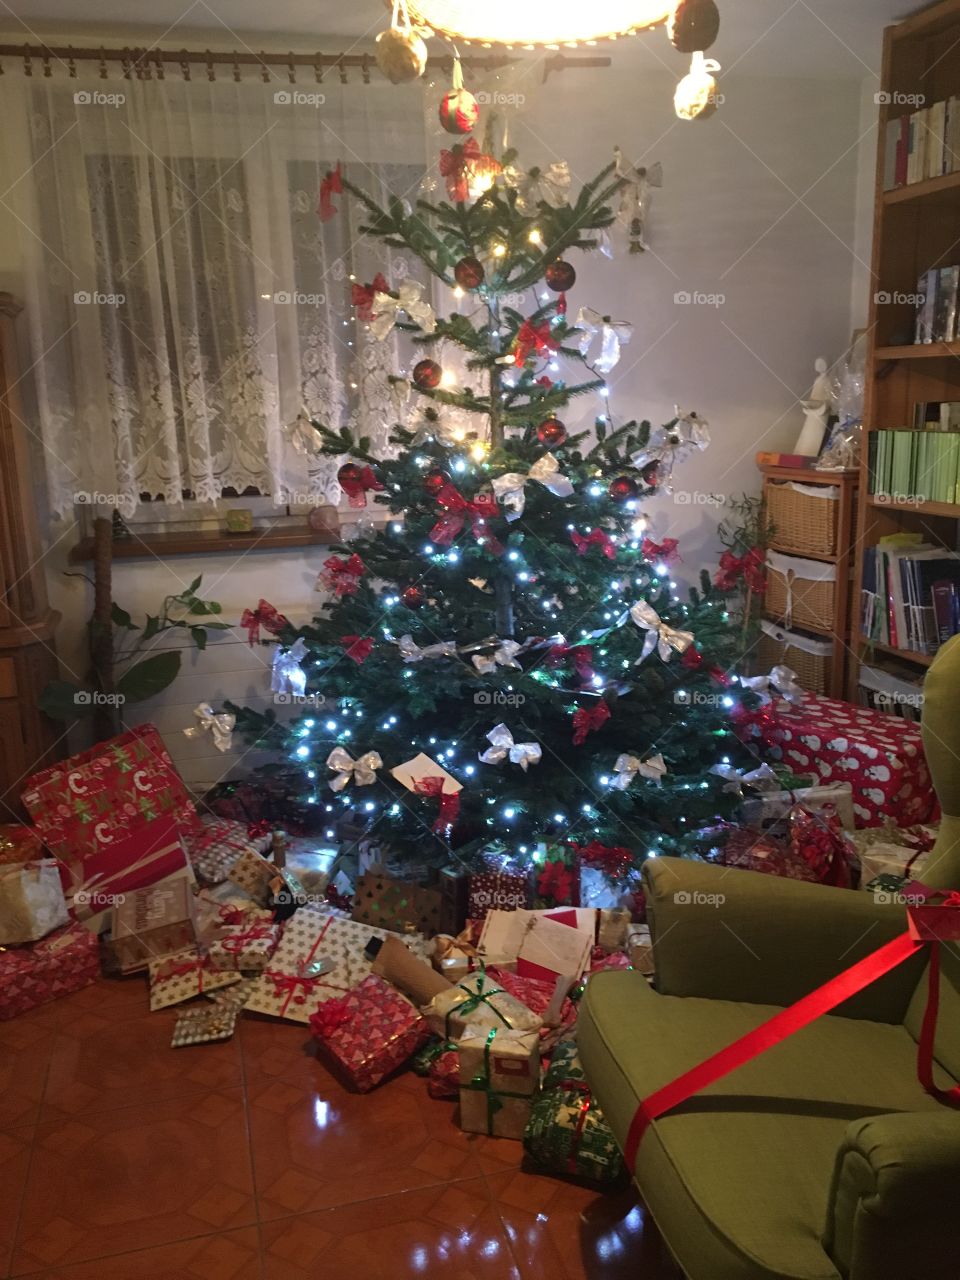 The Christmas tree and the presents